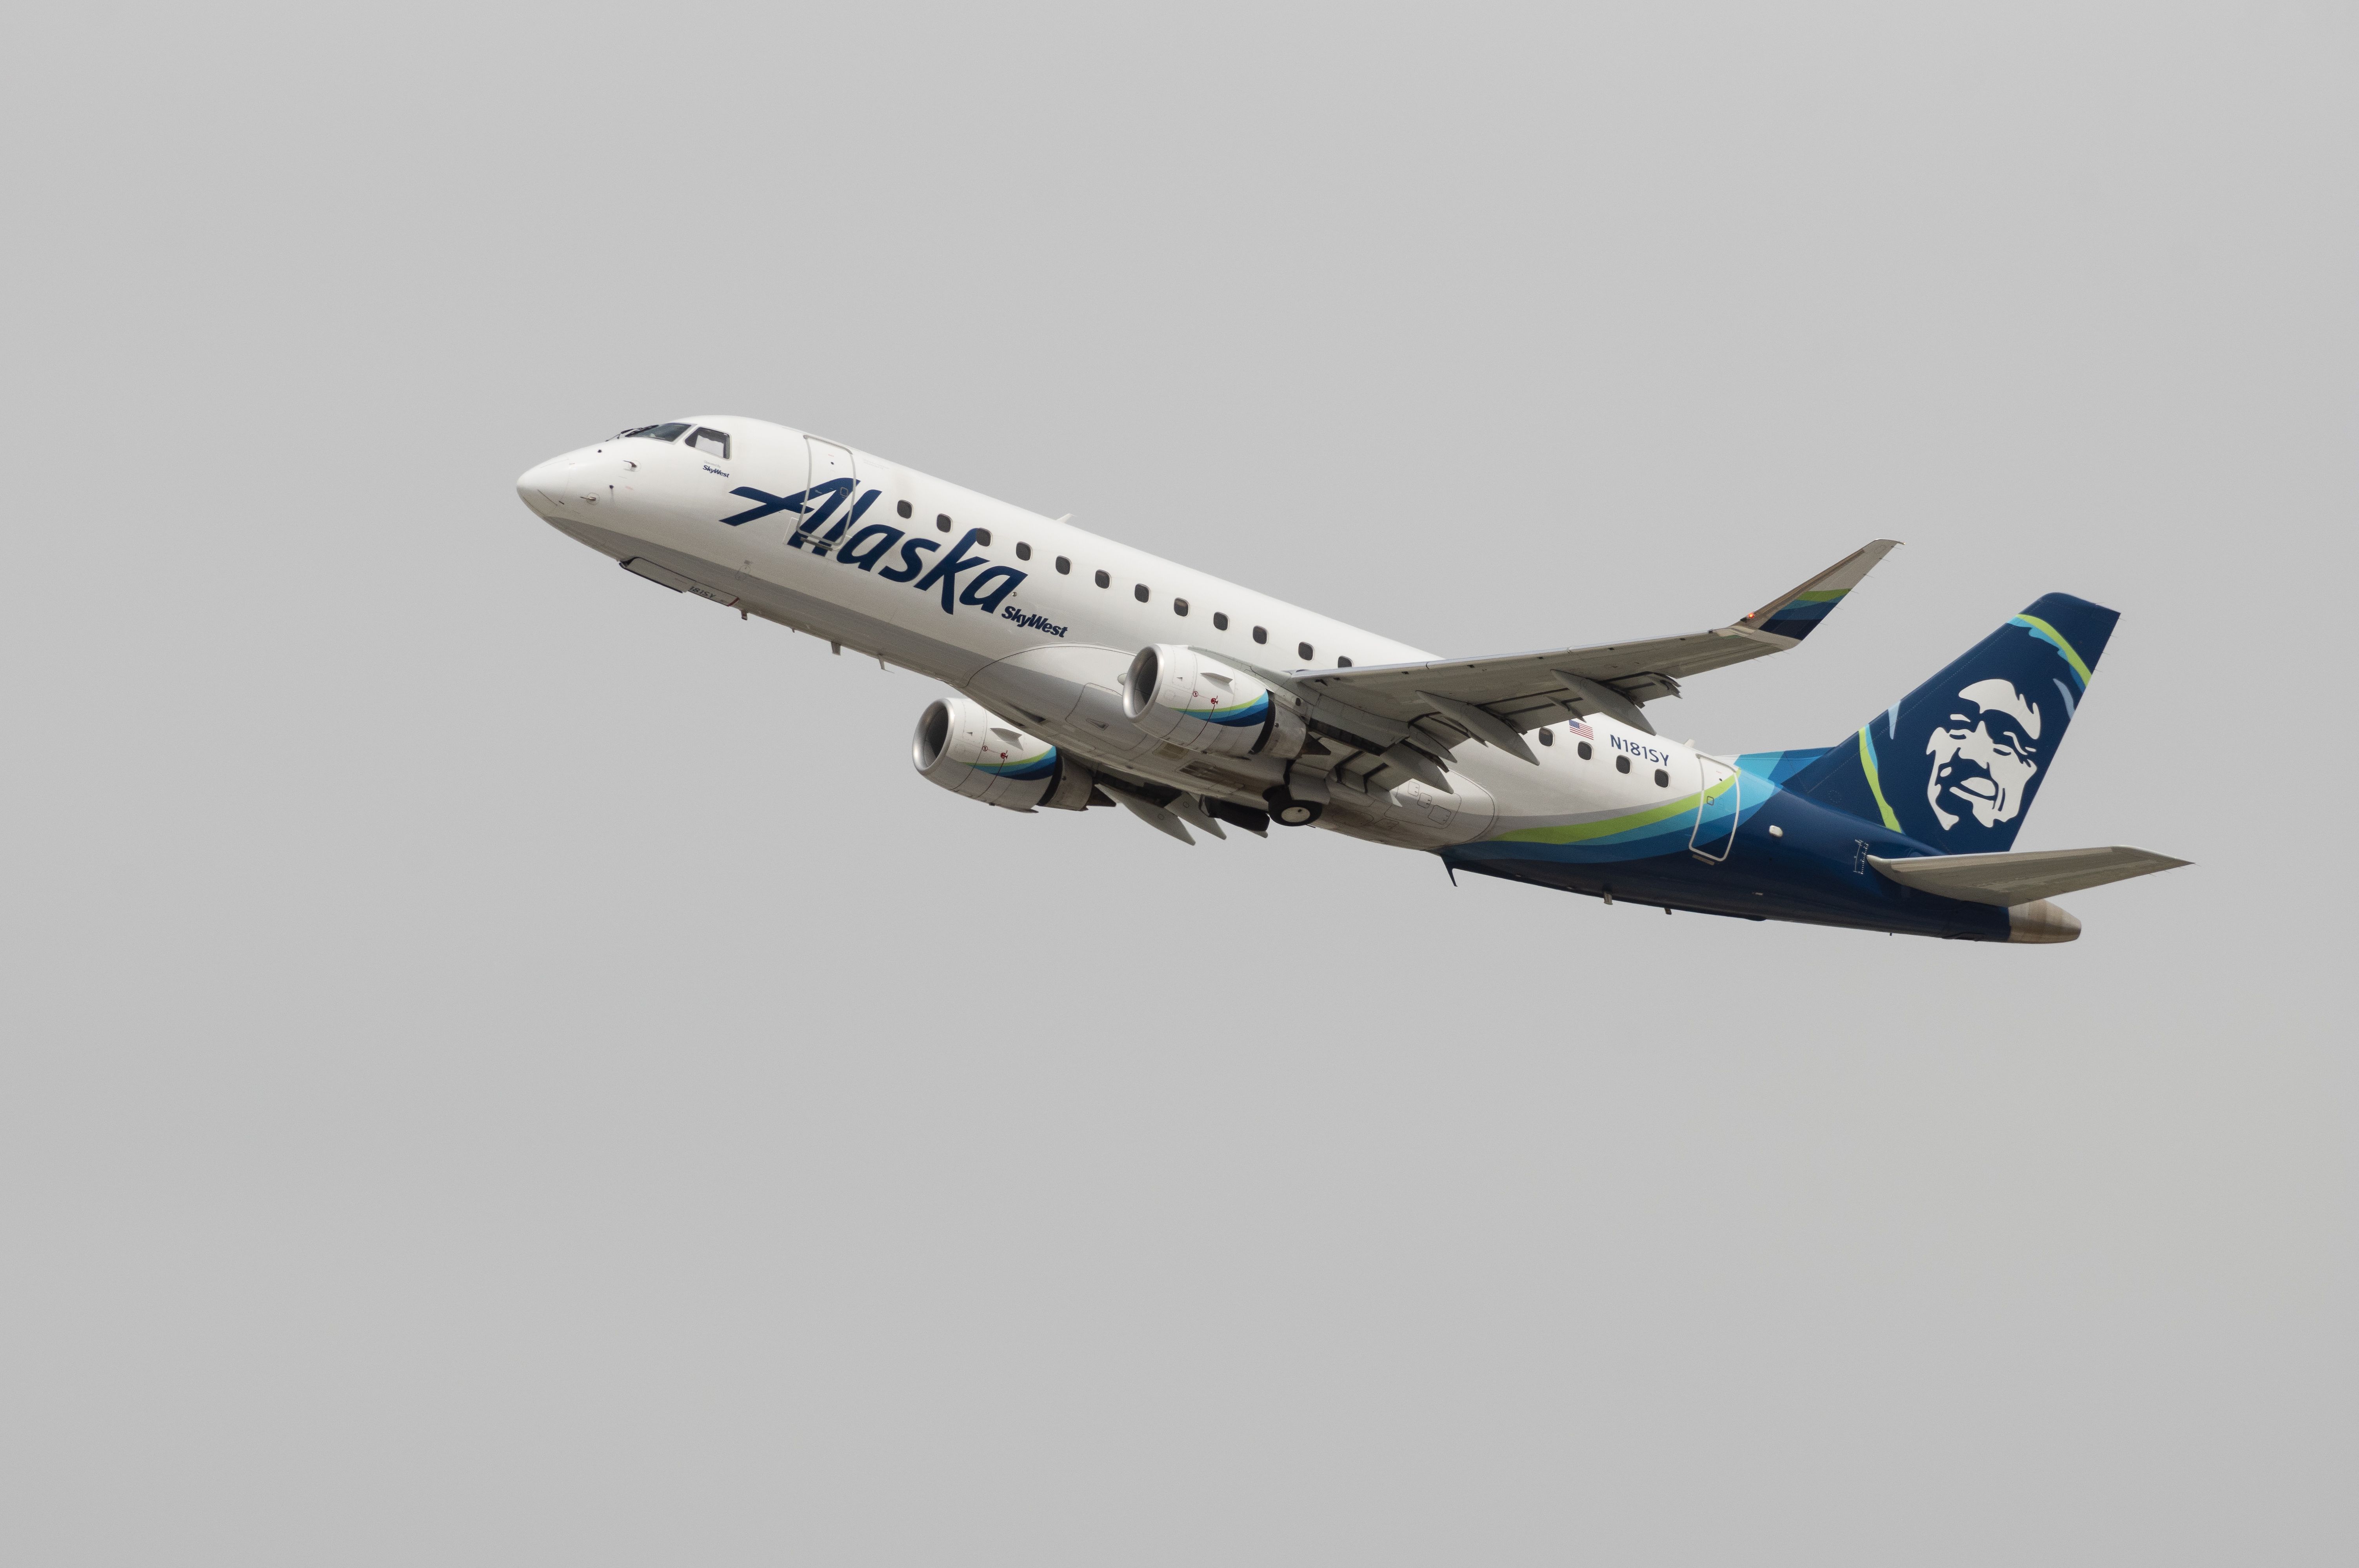 Alaska Airlines Embraer ERJ-175LR (registration N181SY) departing from the Los Angeles International Airport, LAX.